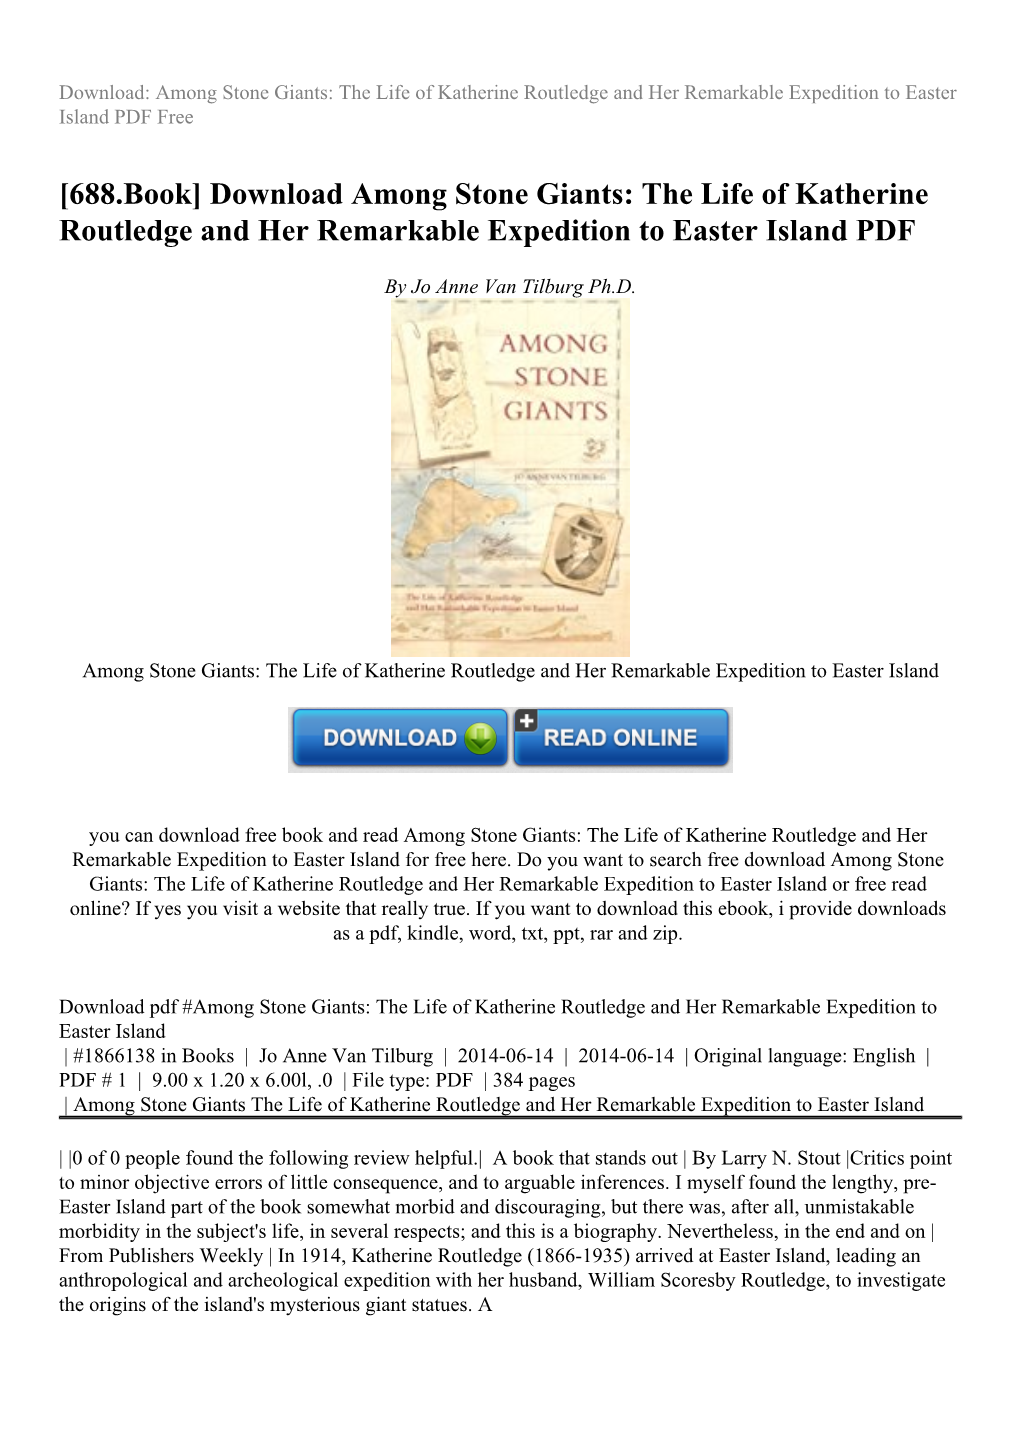 Download Among Stone Giants: the Life of Katherine Routledge and Her Remarkable Expedition to Easter Island PDF